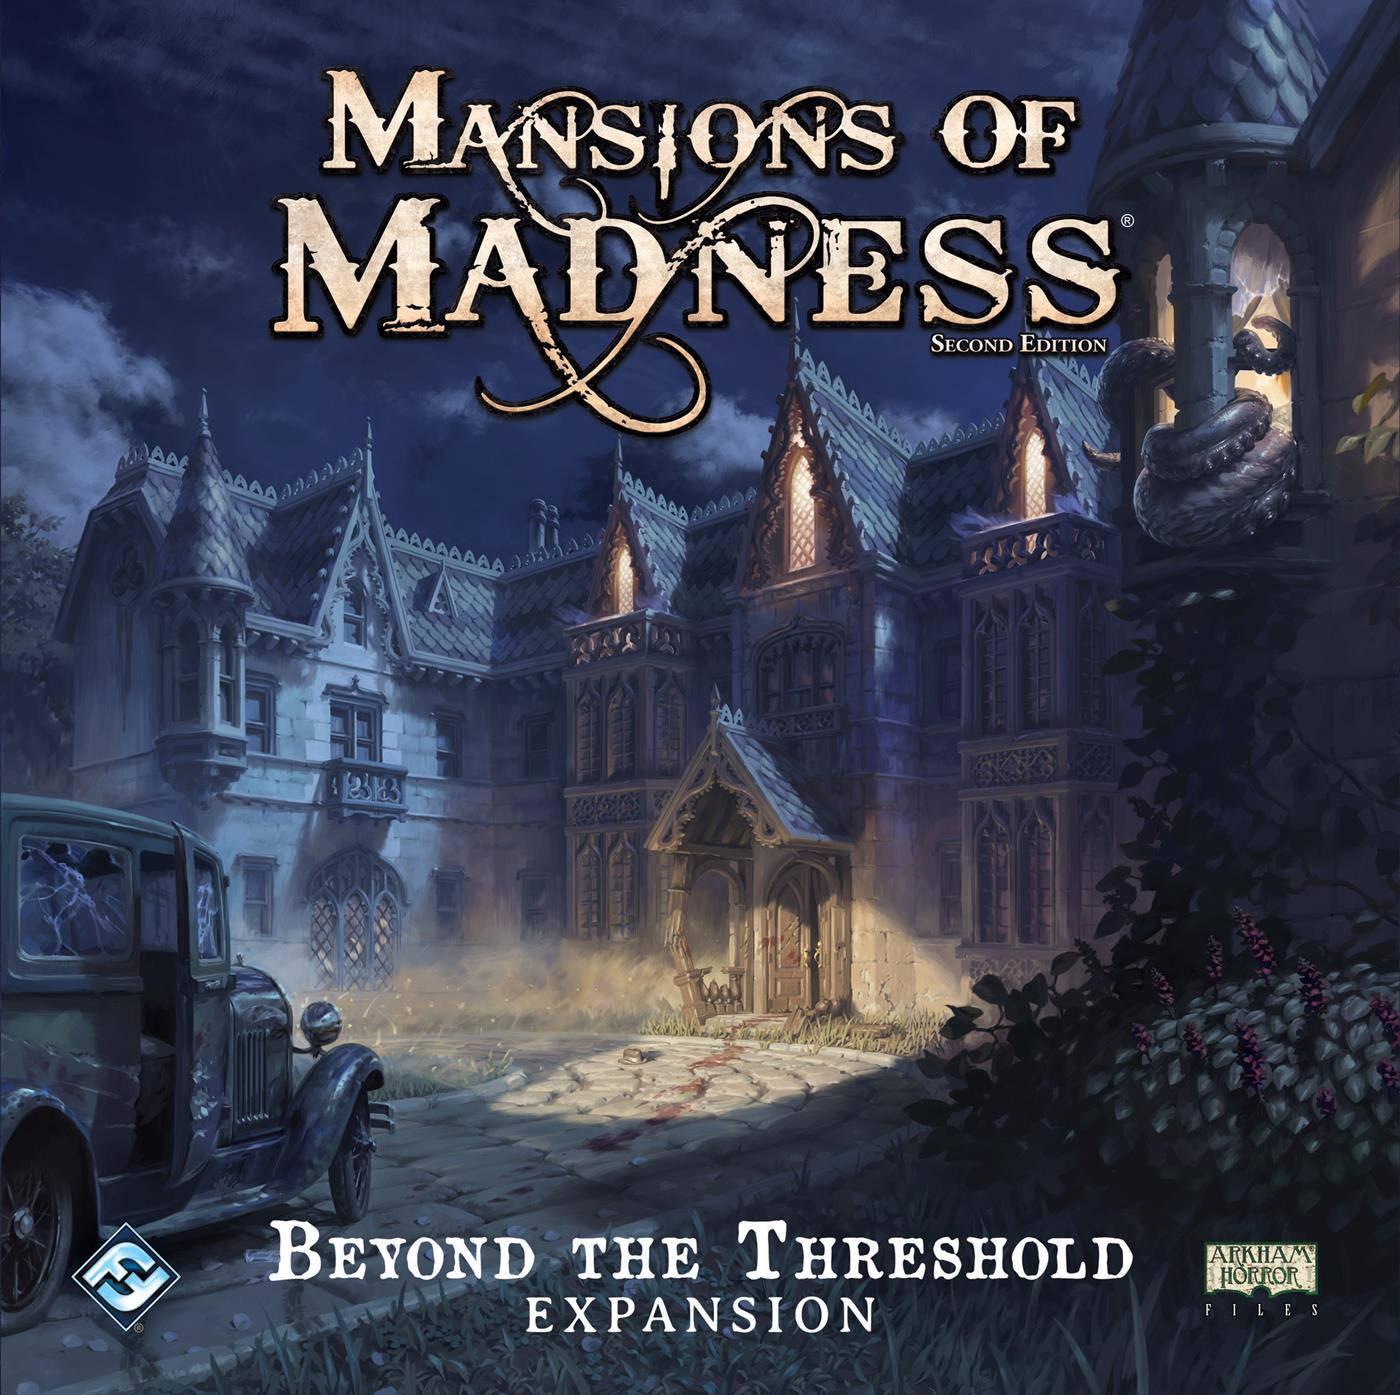 Mansions of Madness Beyond the Threshold Expanion